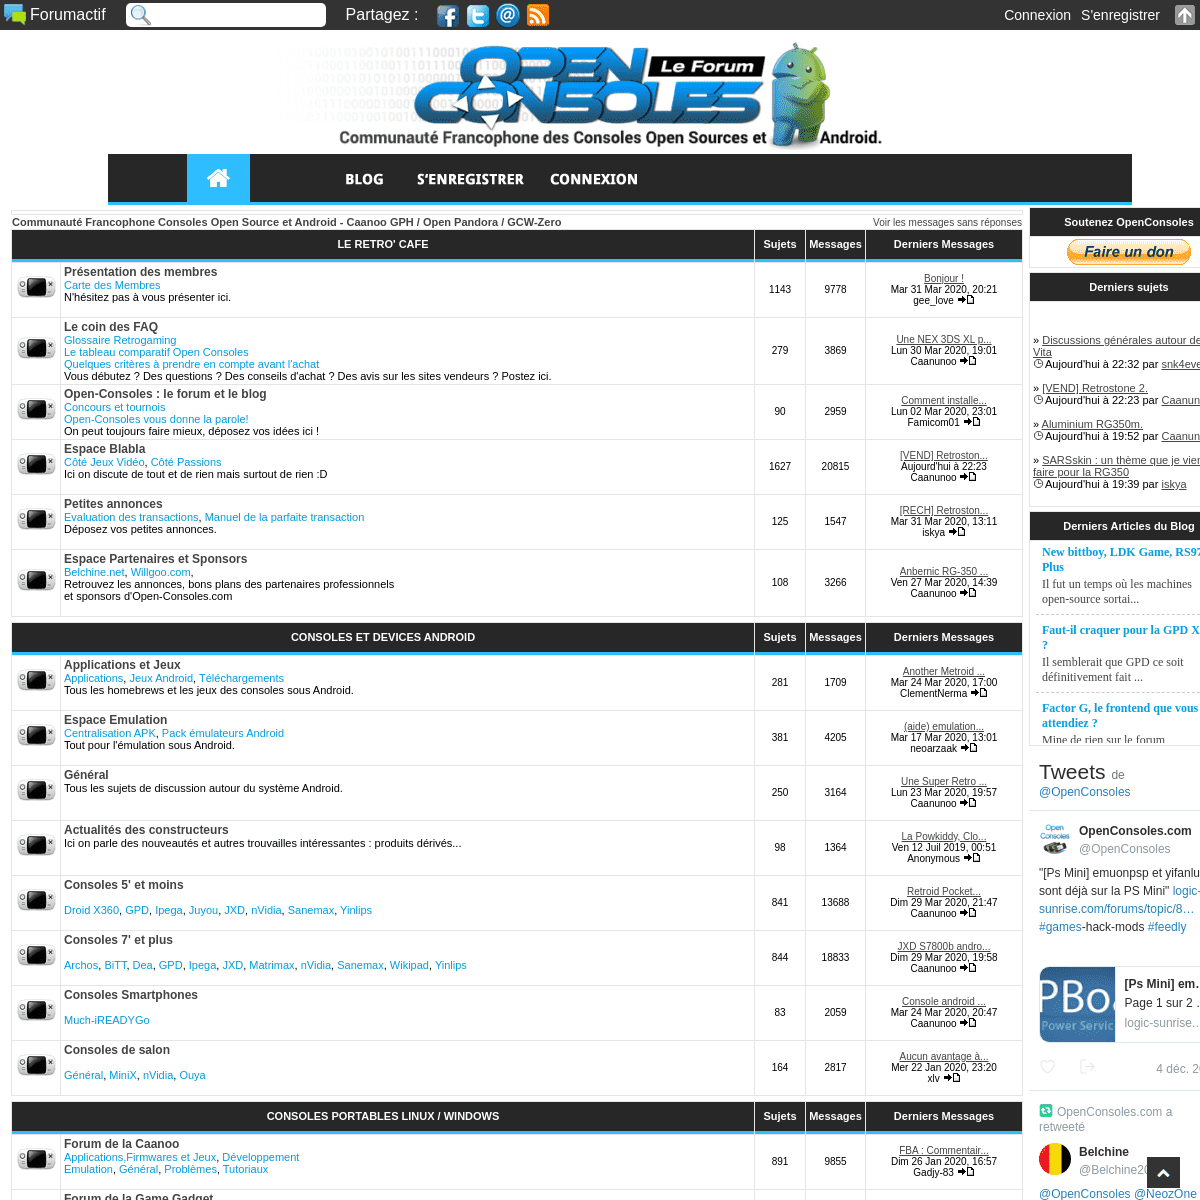 A complete backup of open-consoles.com